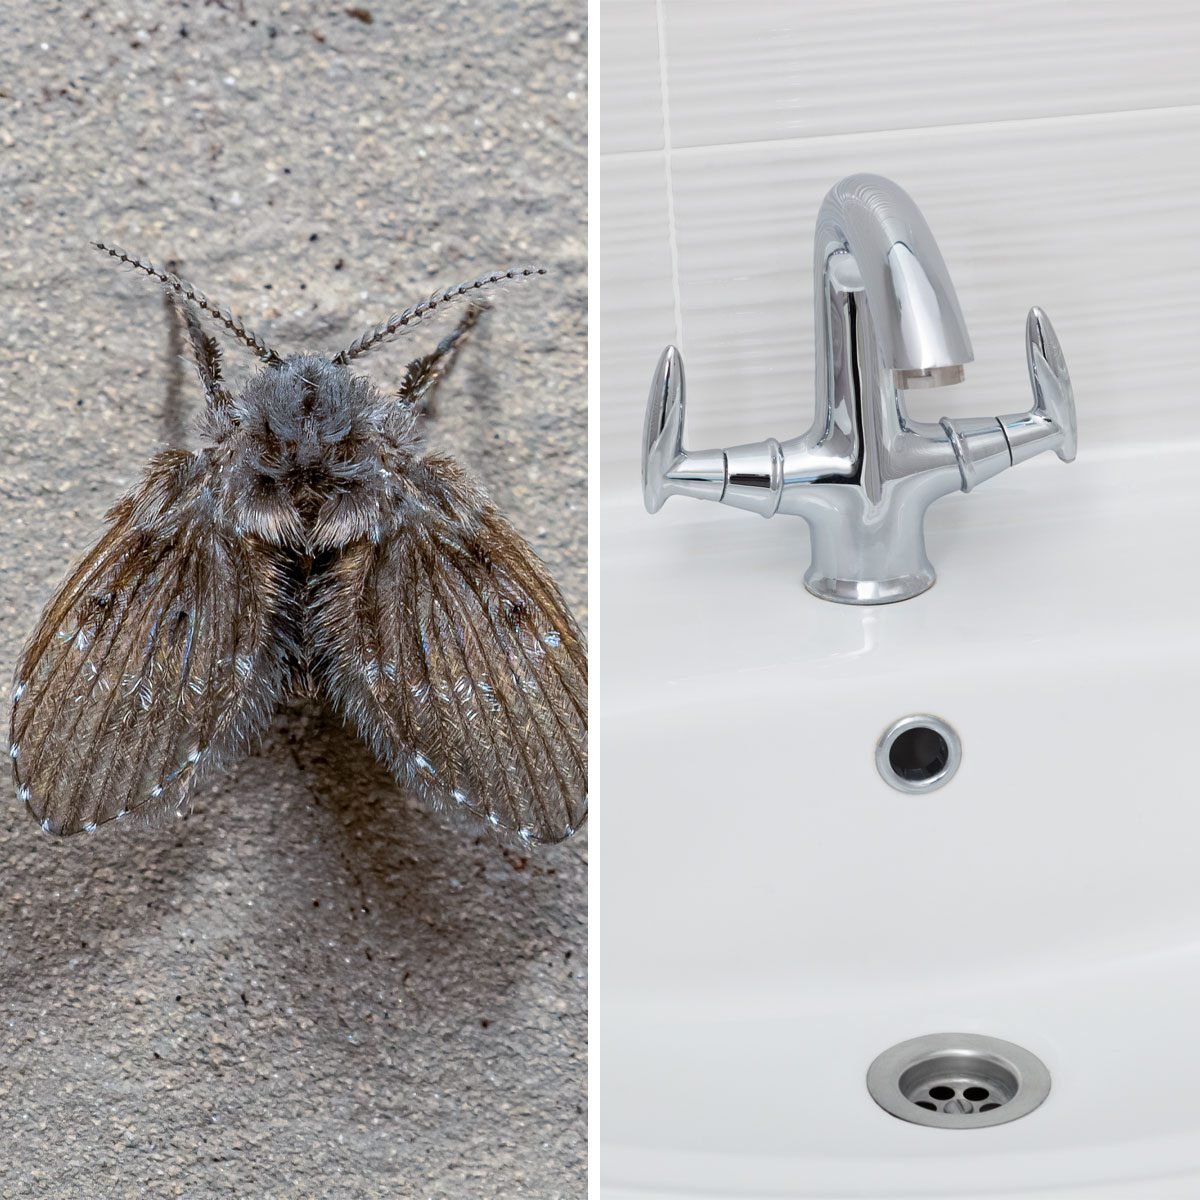 How To Get Rid of Small Flies In Your Bathroom